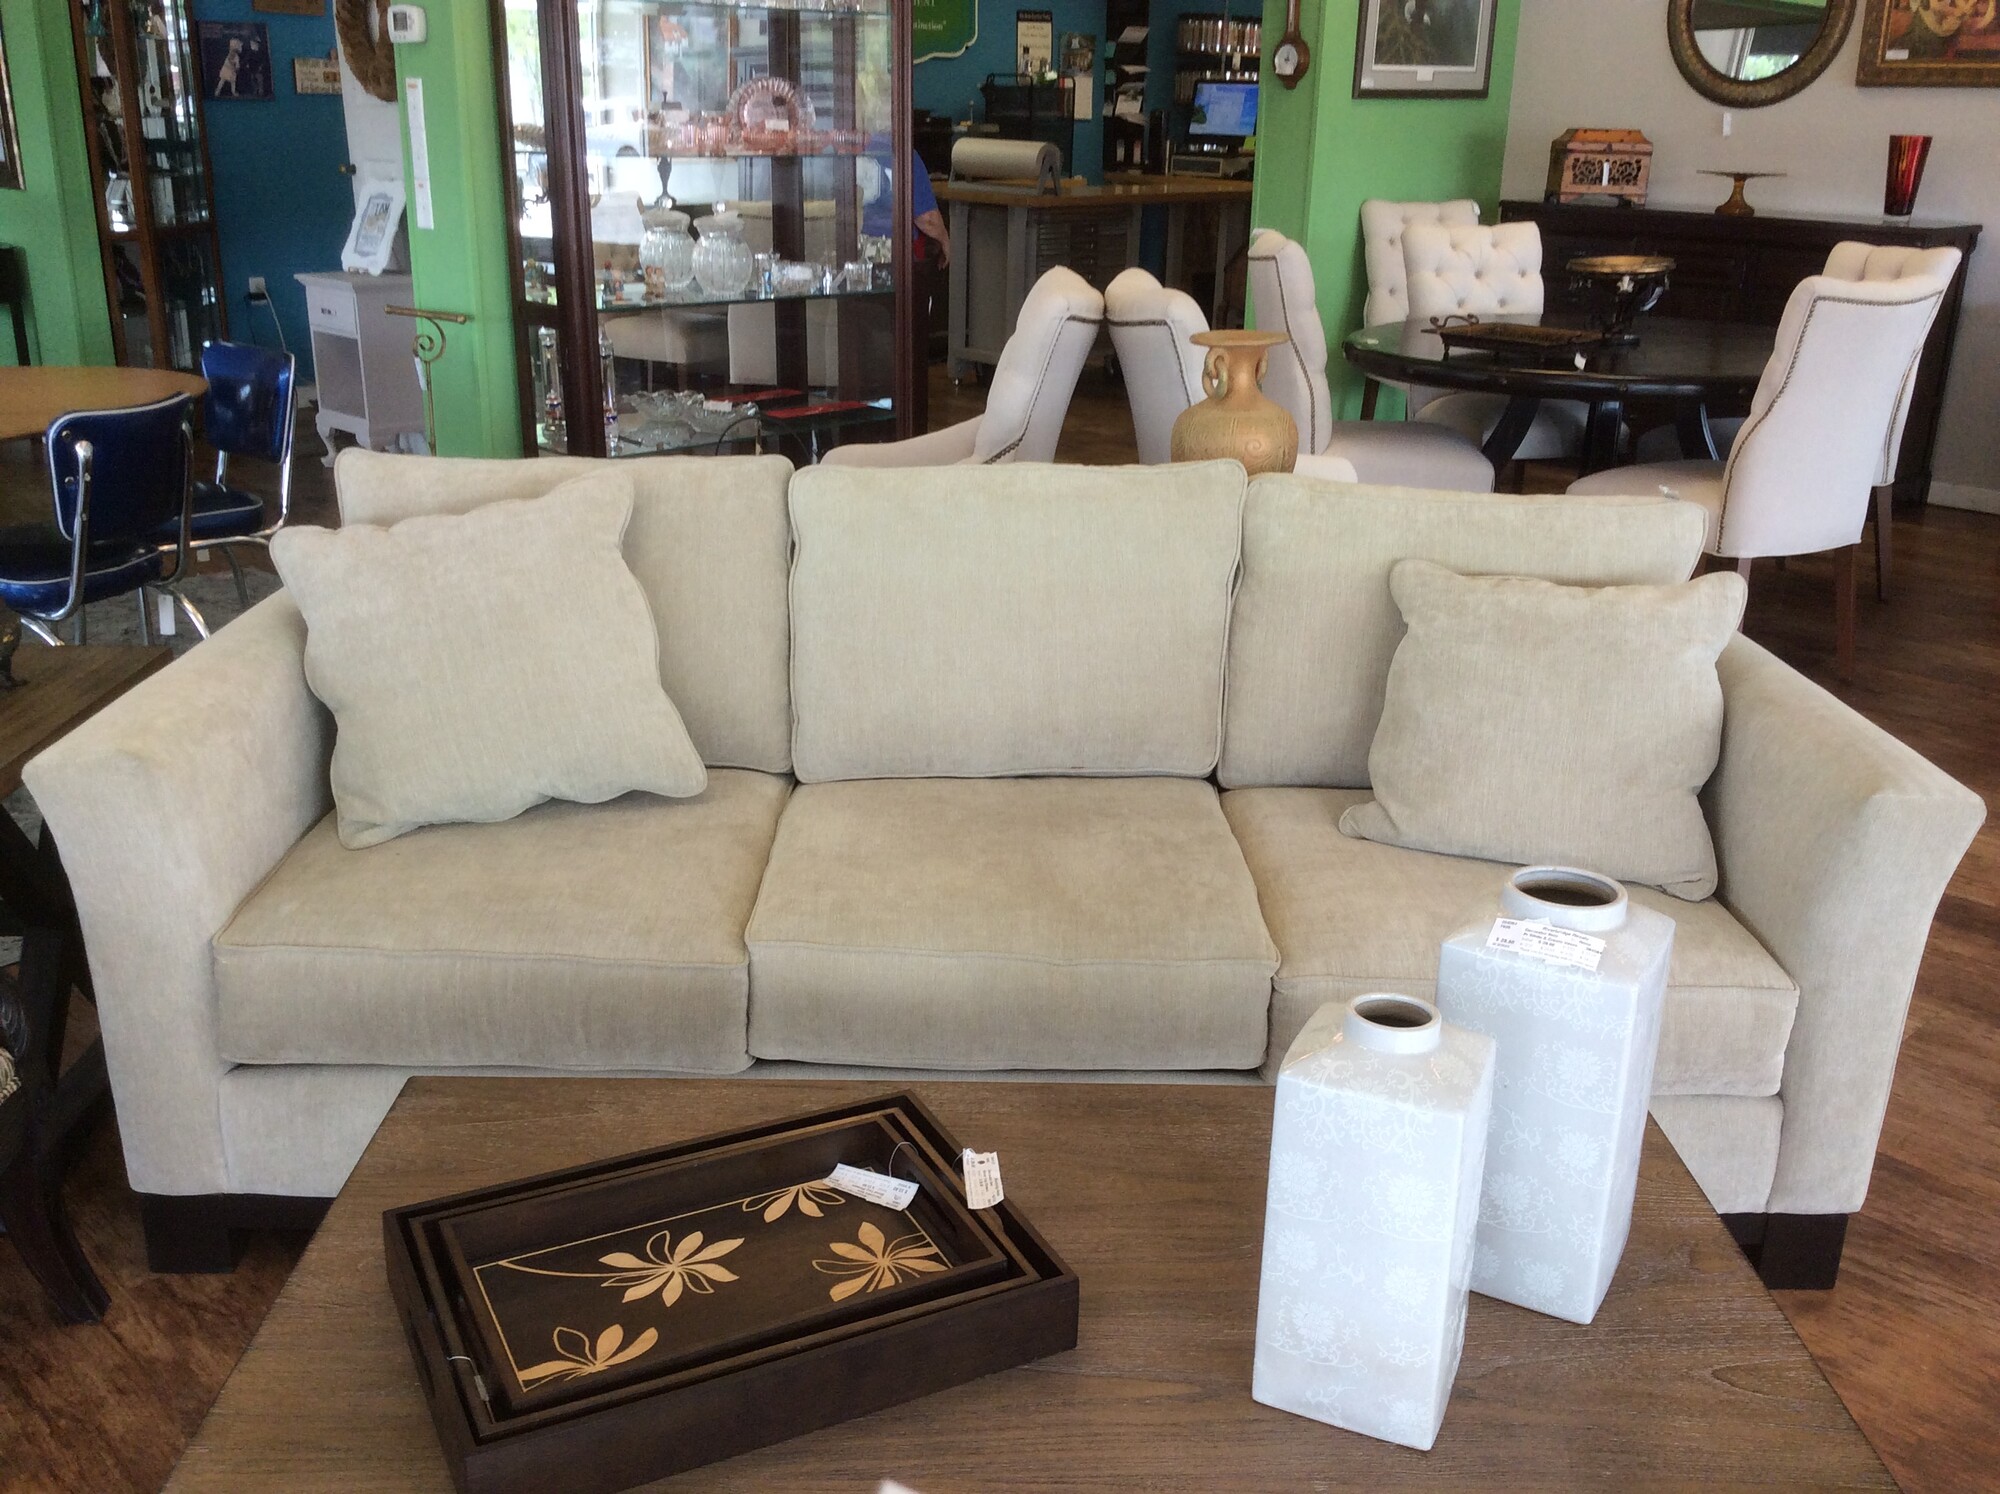 This is a cream Jonathan Lewis sofa that comes with 2 cream pillows.